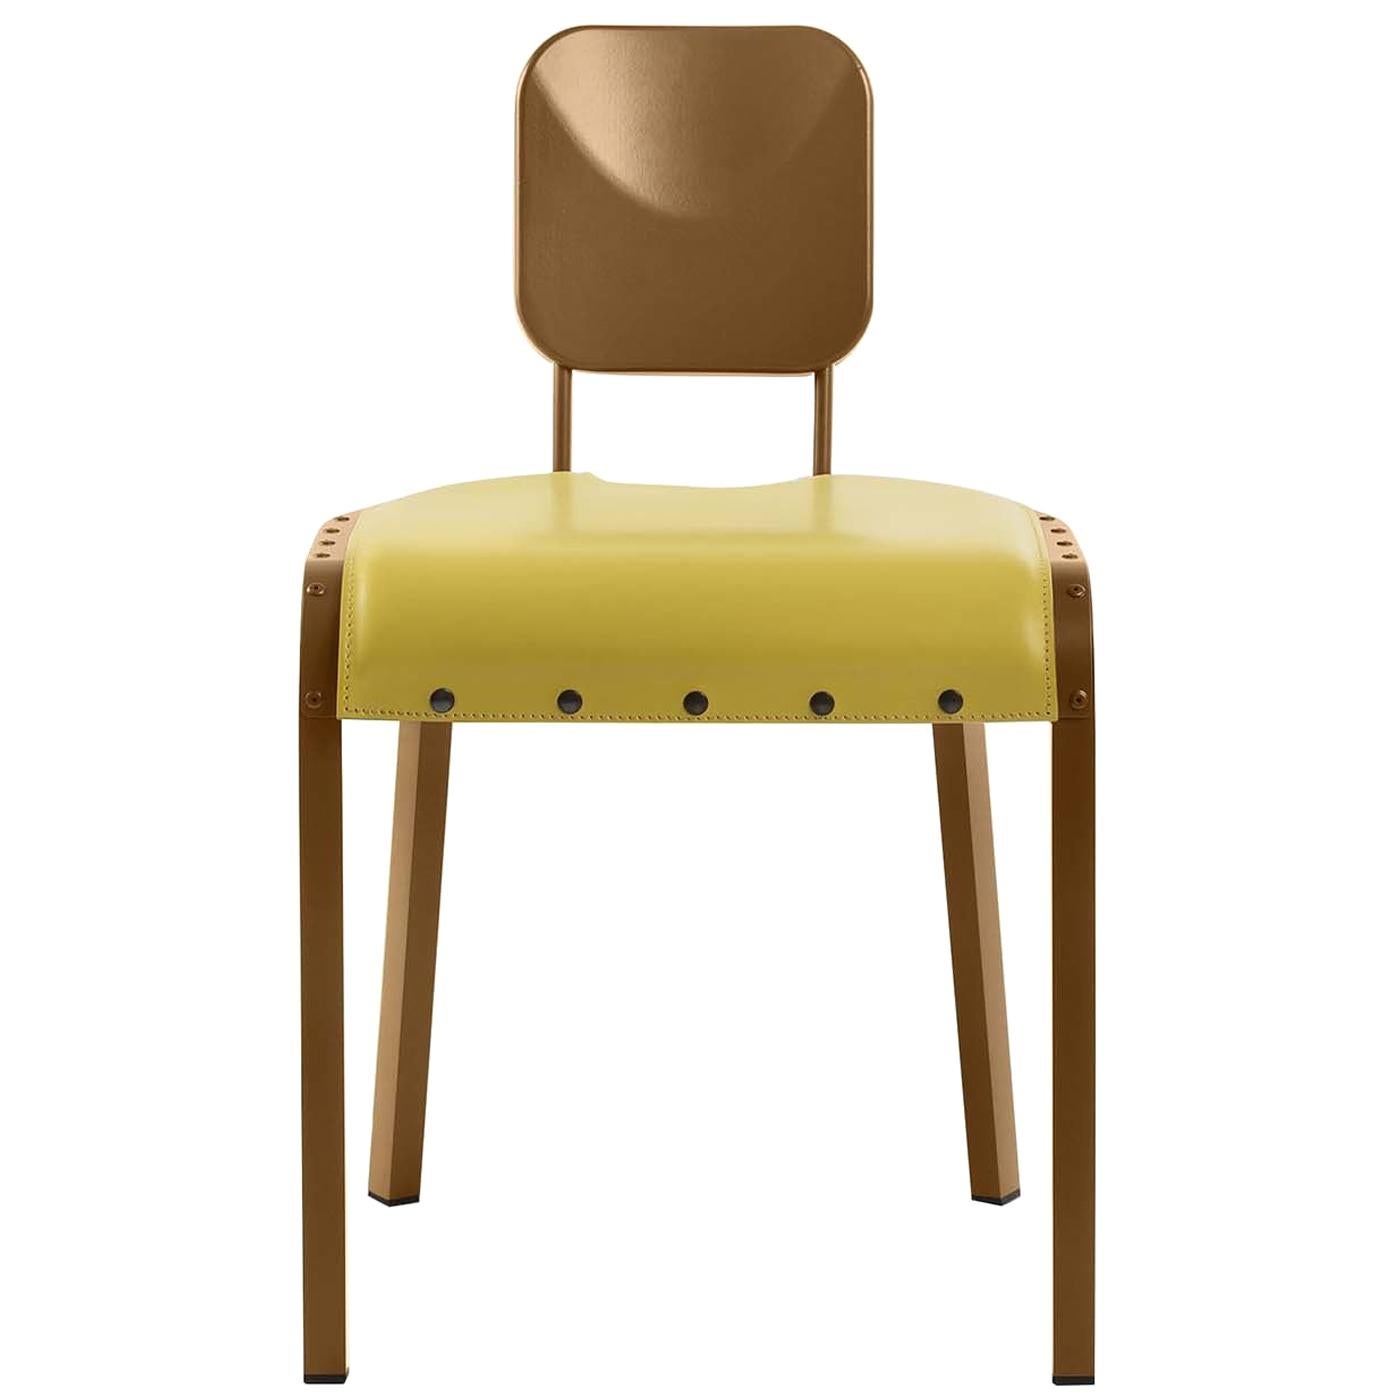 Rock4 Chair with Yellow Leather Seat by Marc Sadler